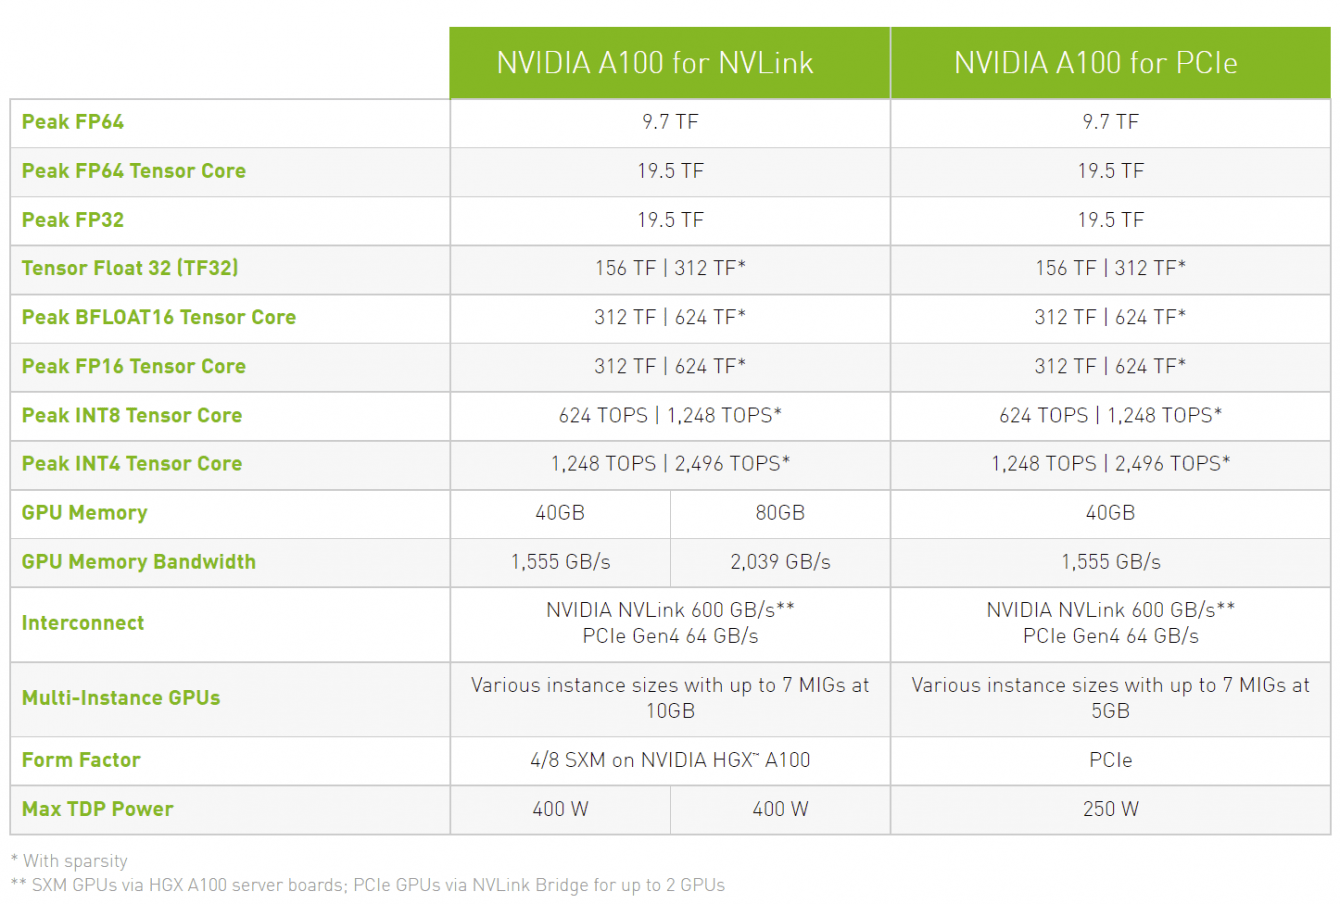 NVIDIA A100: A very special GPU with 80GB of memory